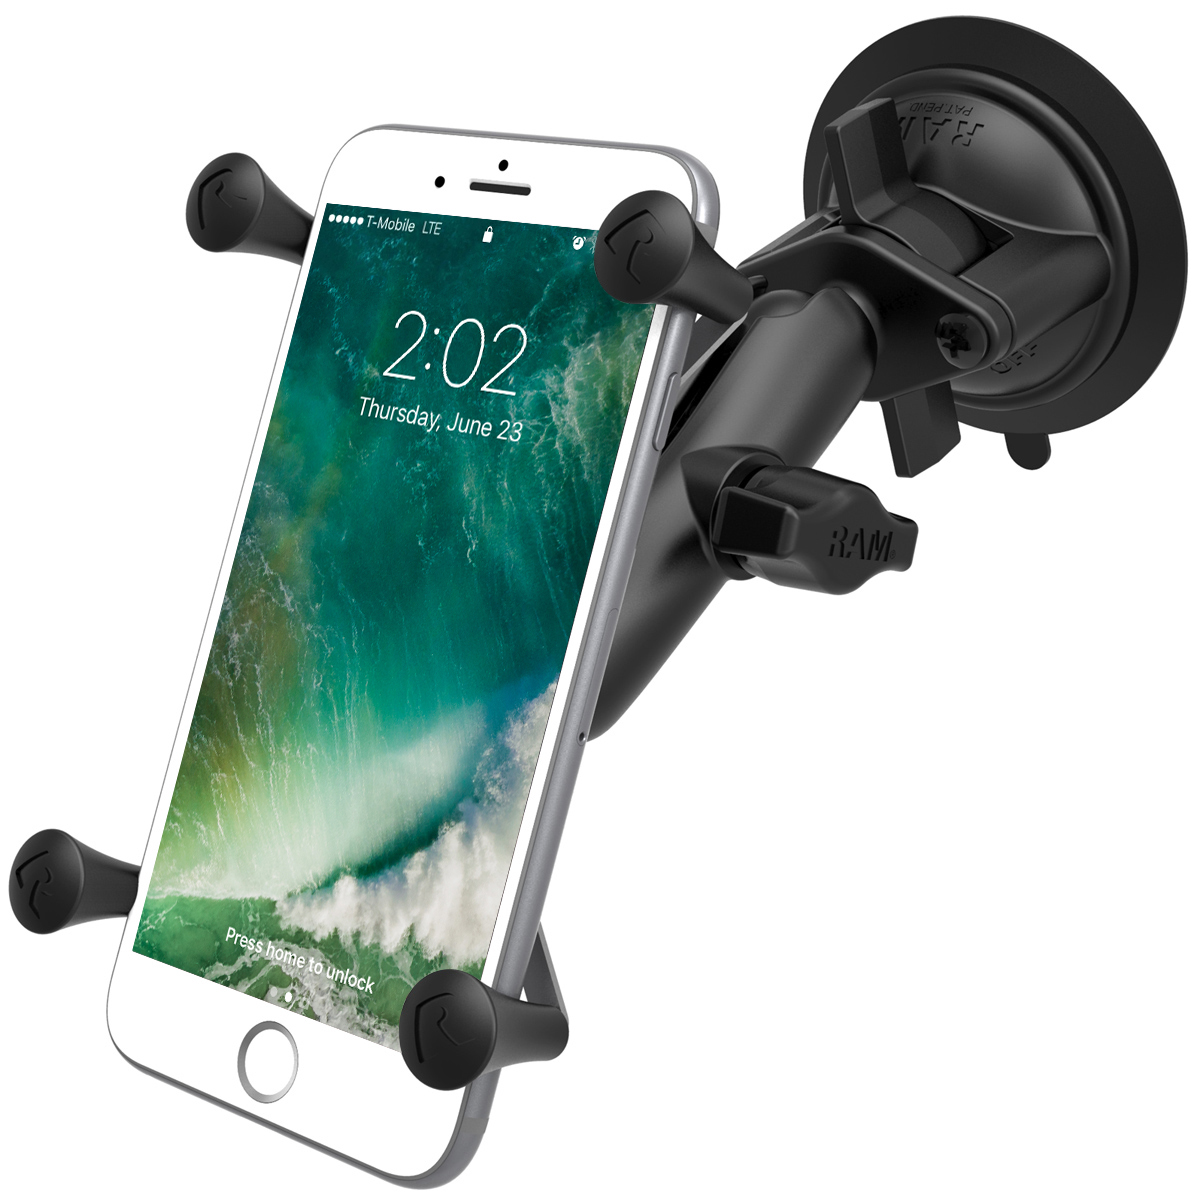  RAM X-Grip Large Phone Mount with RAM Twist-Lock Suction Cup Base  